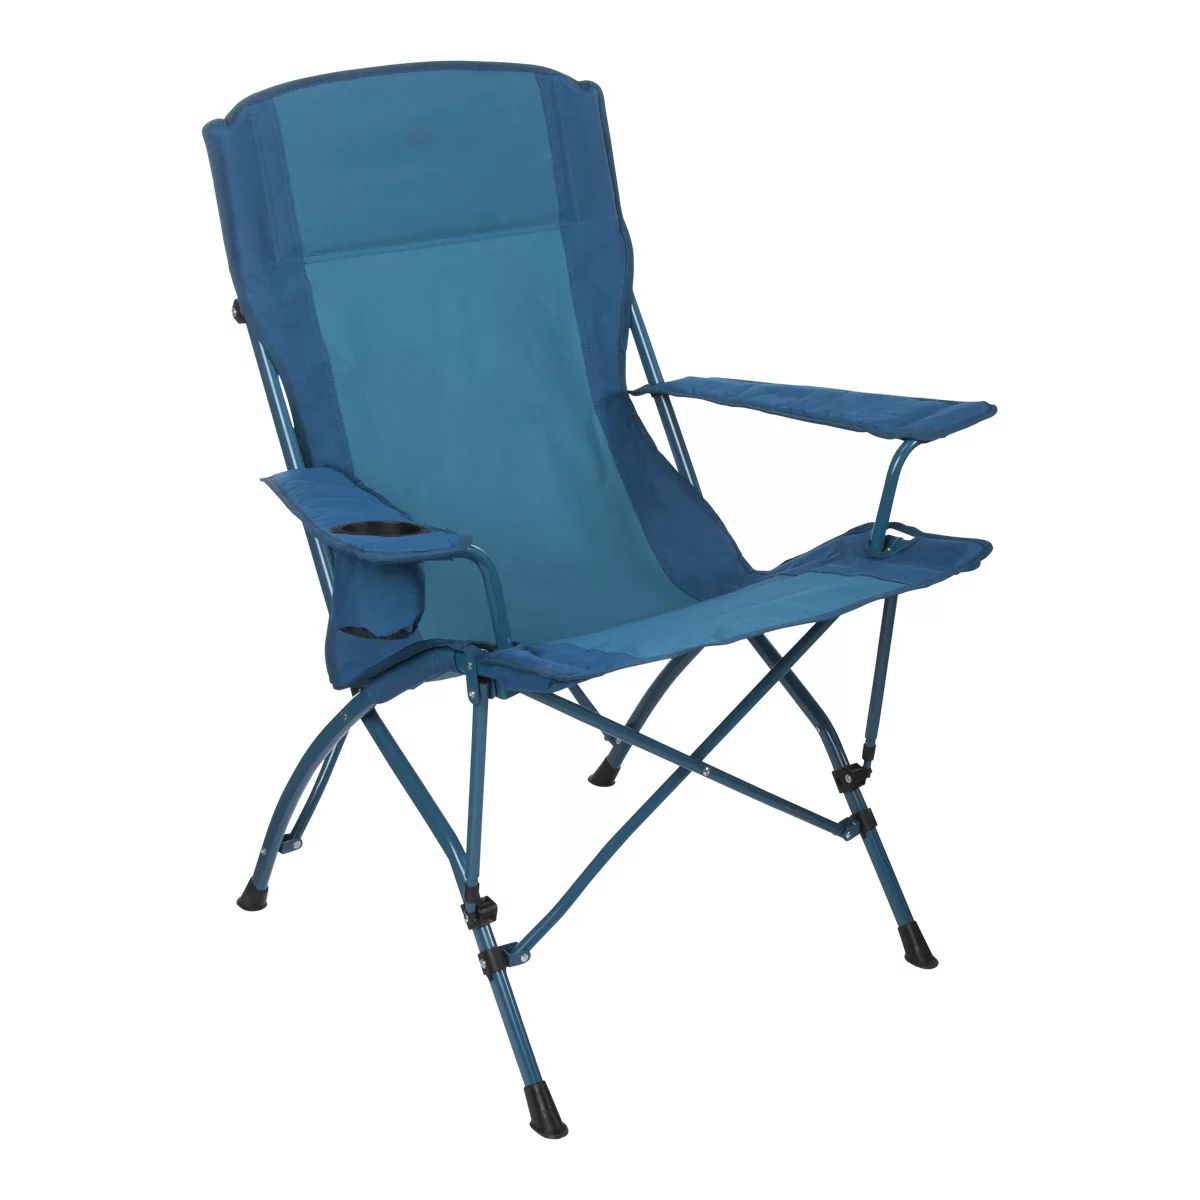 Preferred Nation Folding Camping Chair & Reviews